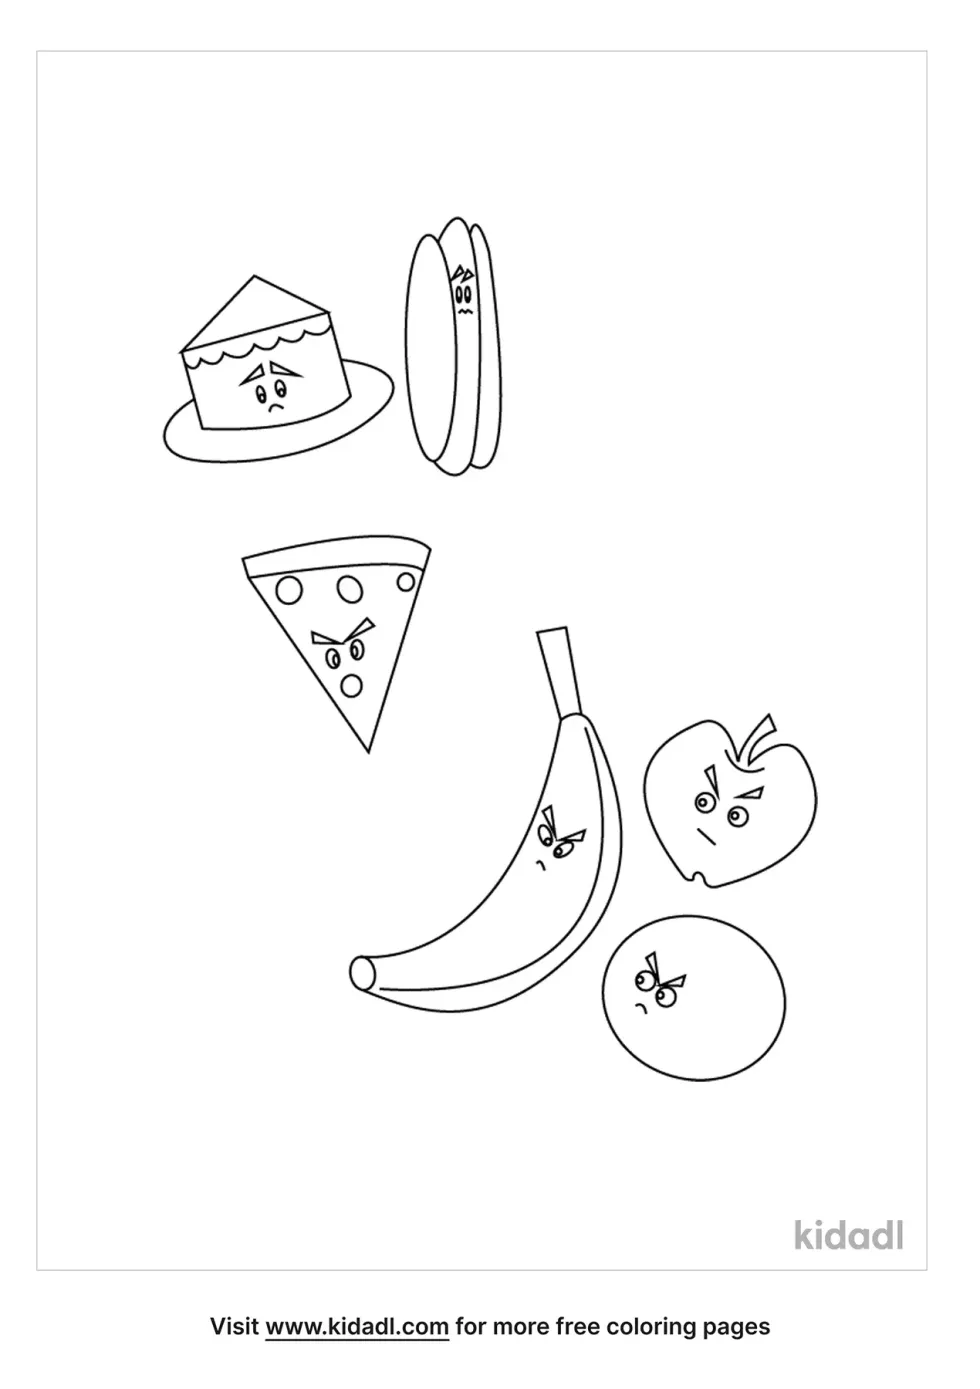 Good Vs Bad Foods Coloring Page